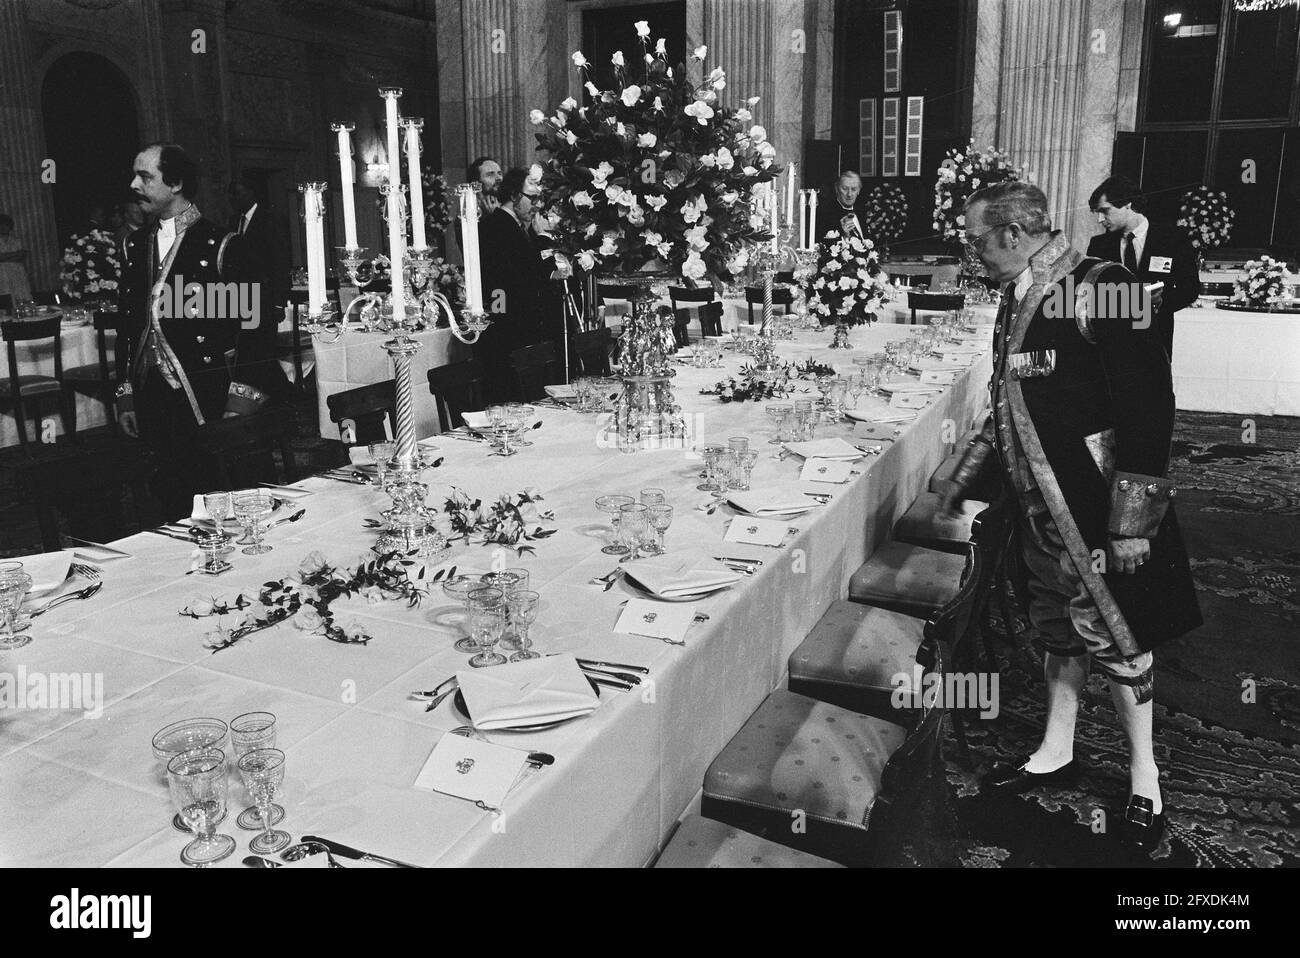 State visit President Mitterand of France; dinner table with lackey, February 6, 1984, dinners, lackeys, state visits, The Netherlands, 20th century press agency photo, news to remember, documentary, historic photography 1945-1990, visual stories, human history of the Twentieth Century, capturing moments in time Stock Photo